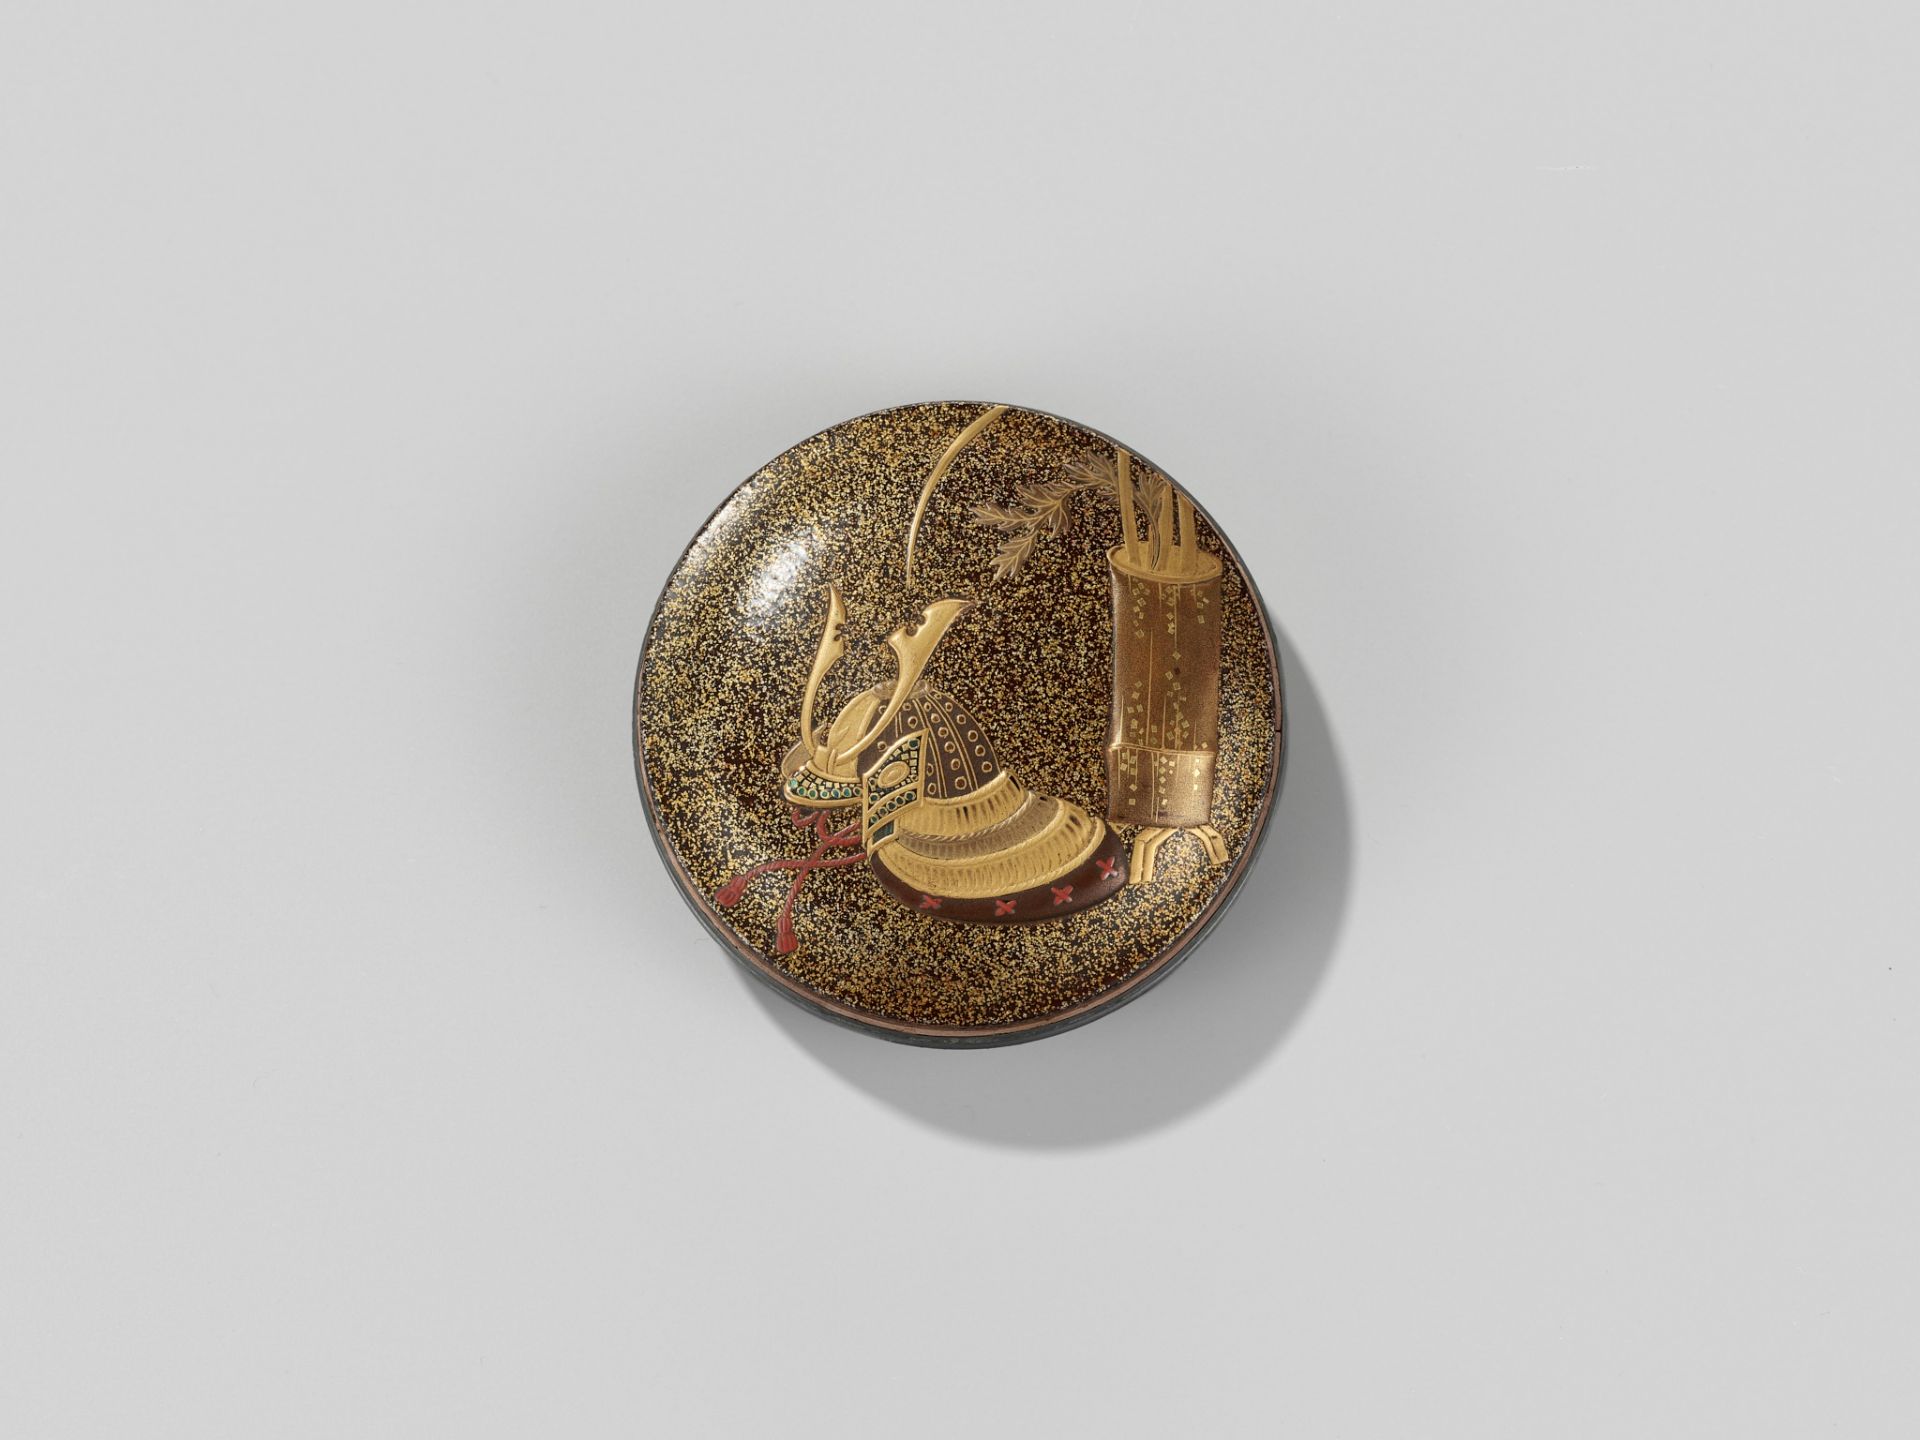 A FINE LACQUER KOGO (INCENSE BOX) AND COVER WITH KABUTO AND BAMBOO HANAKAGO - Image 5 of 7